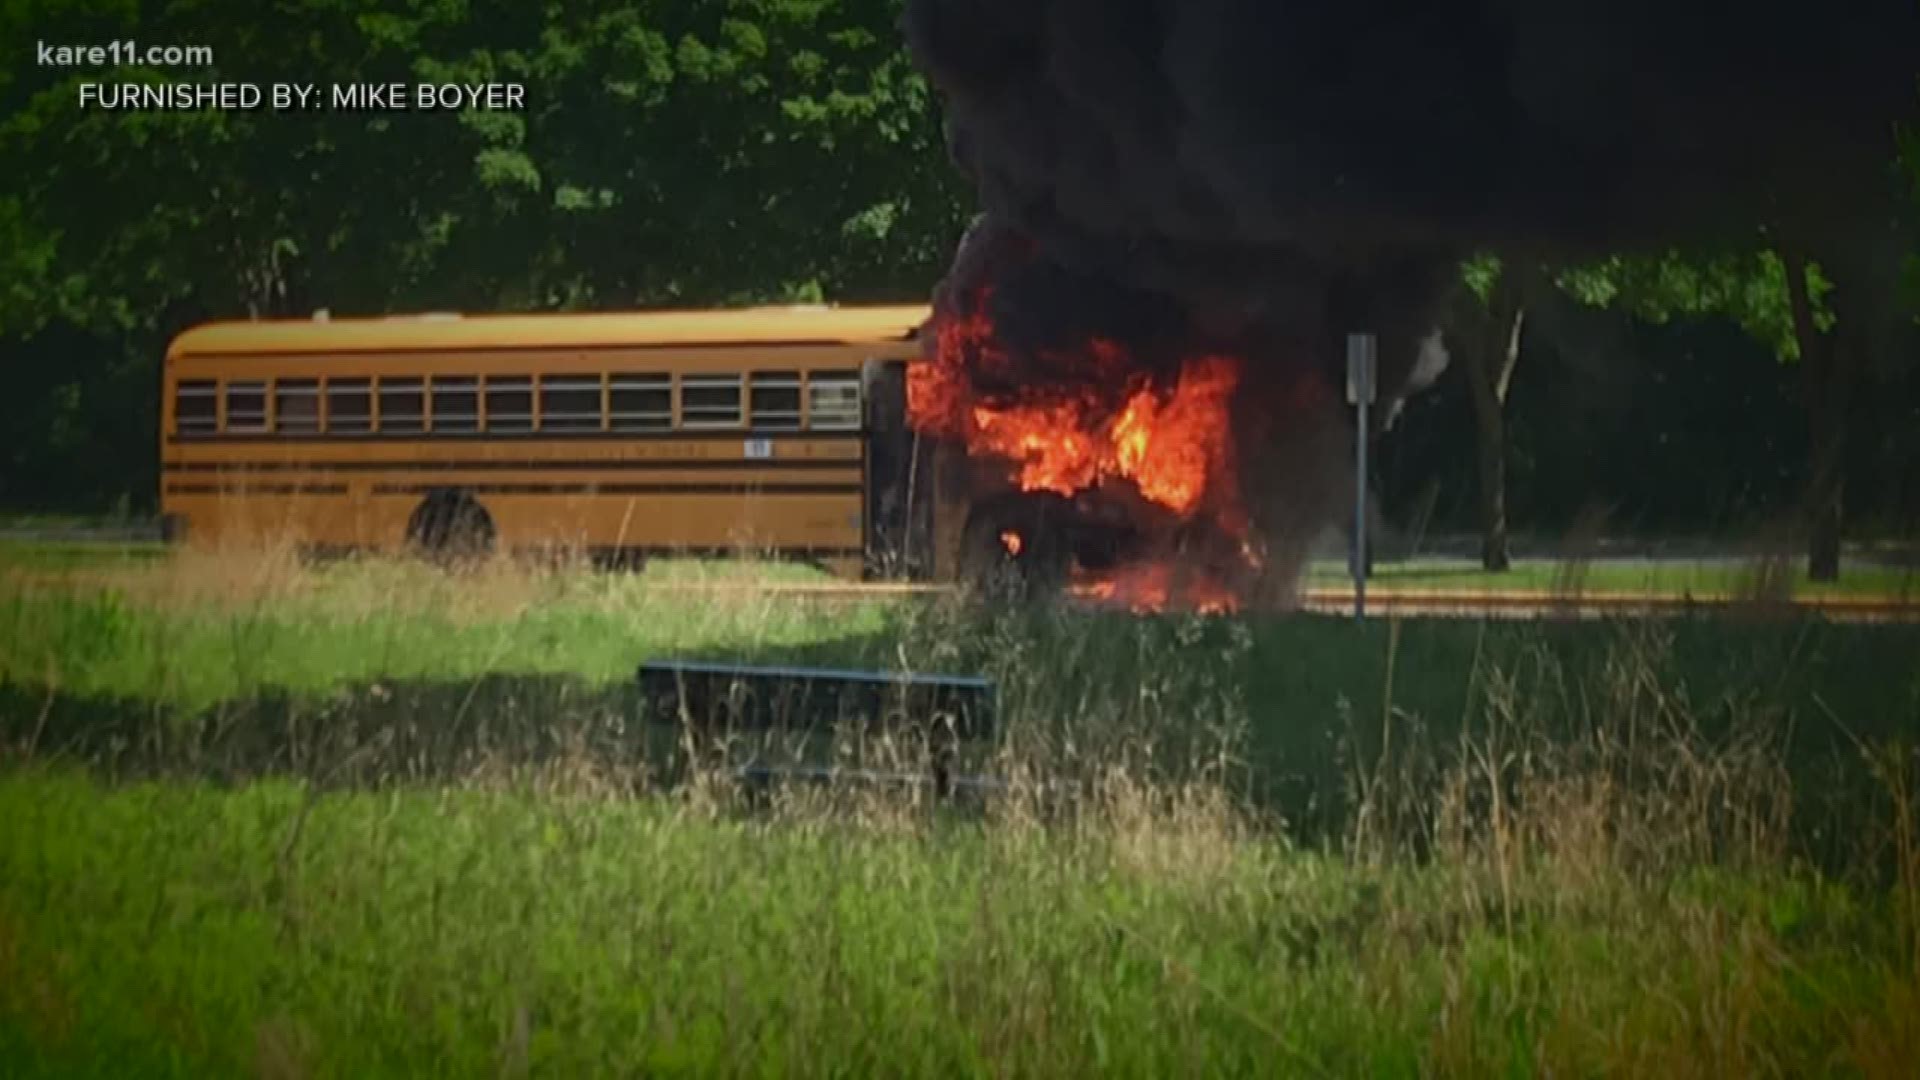 Bus catches fire outside Chanhassen elementary school